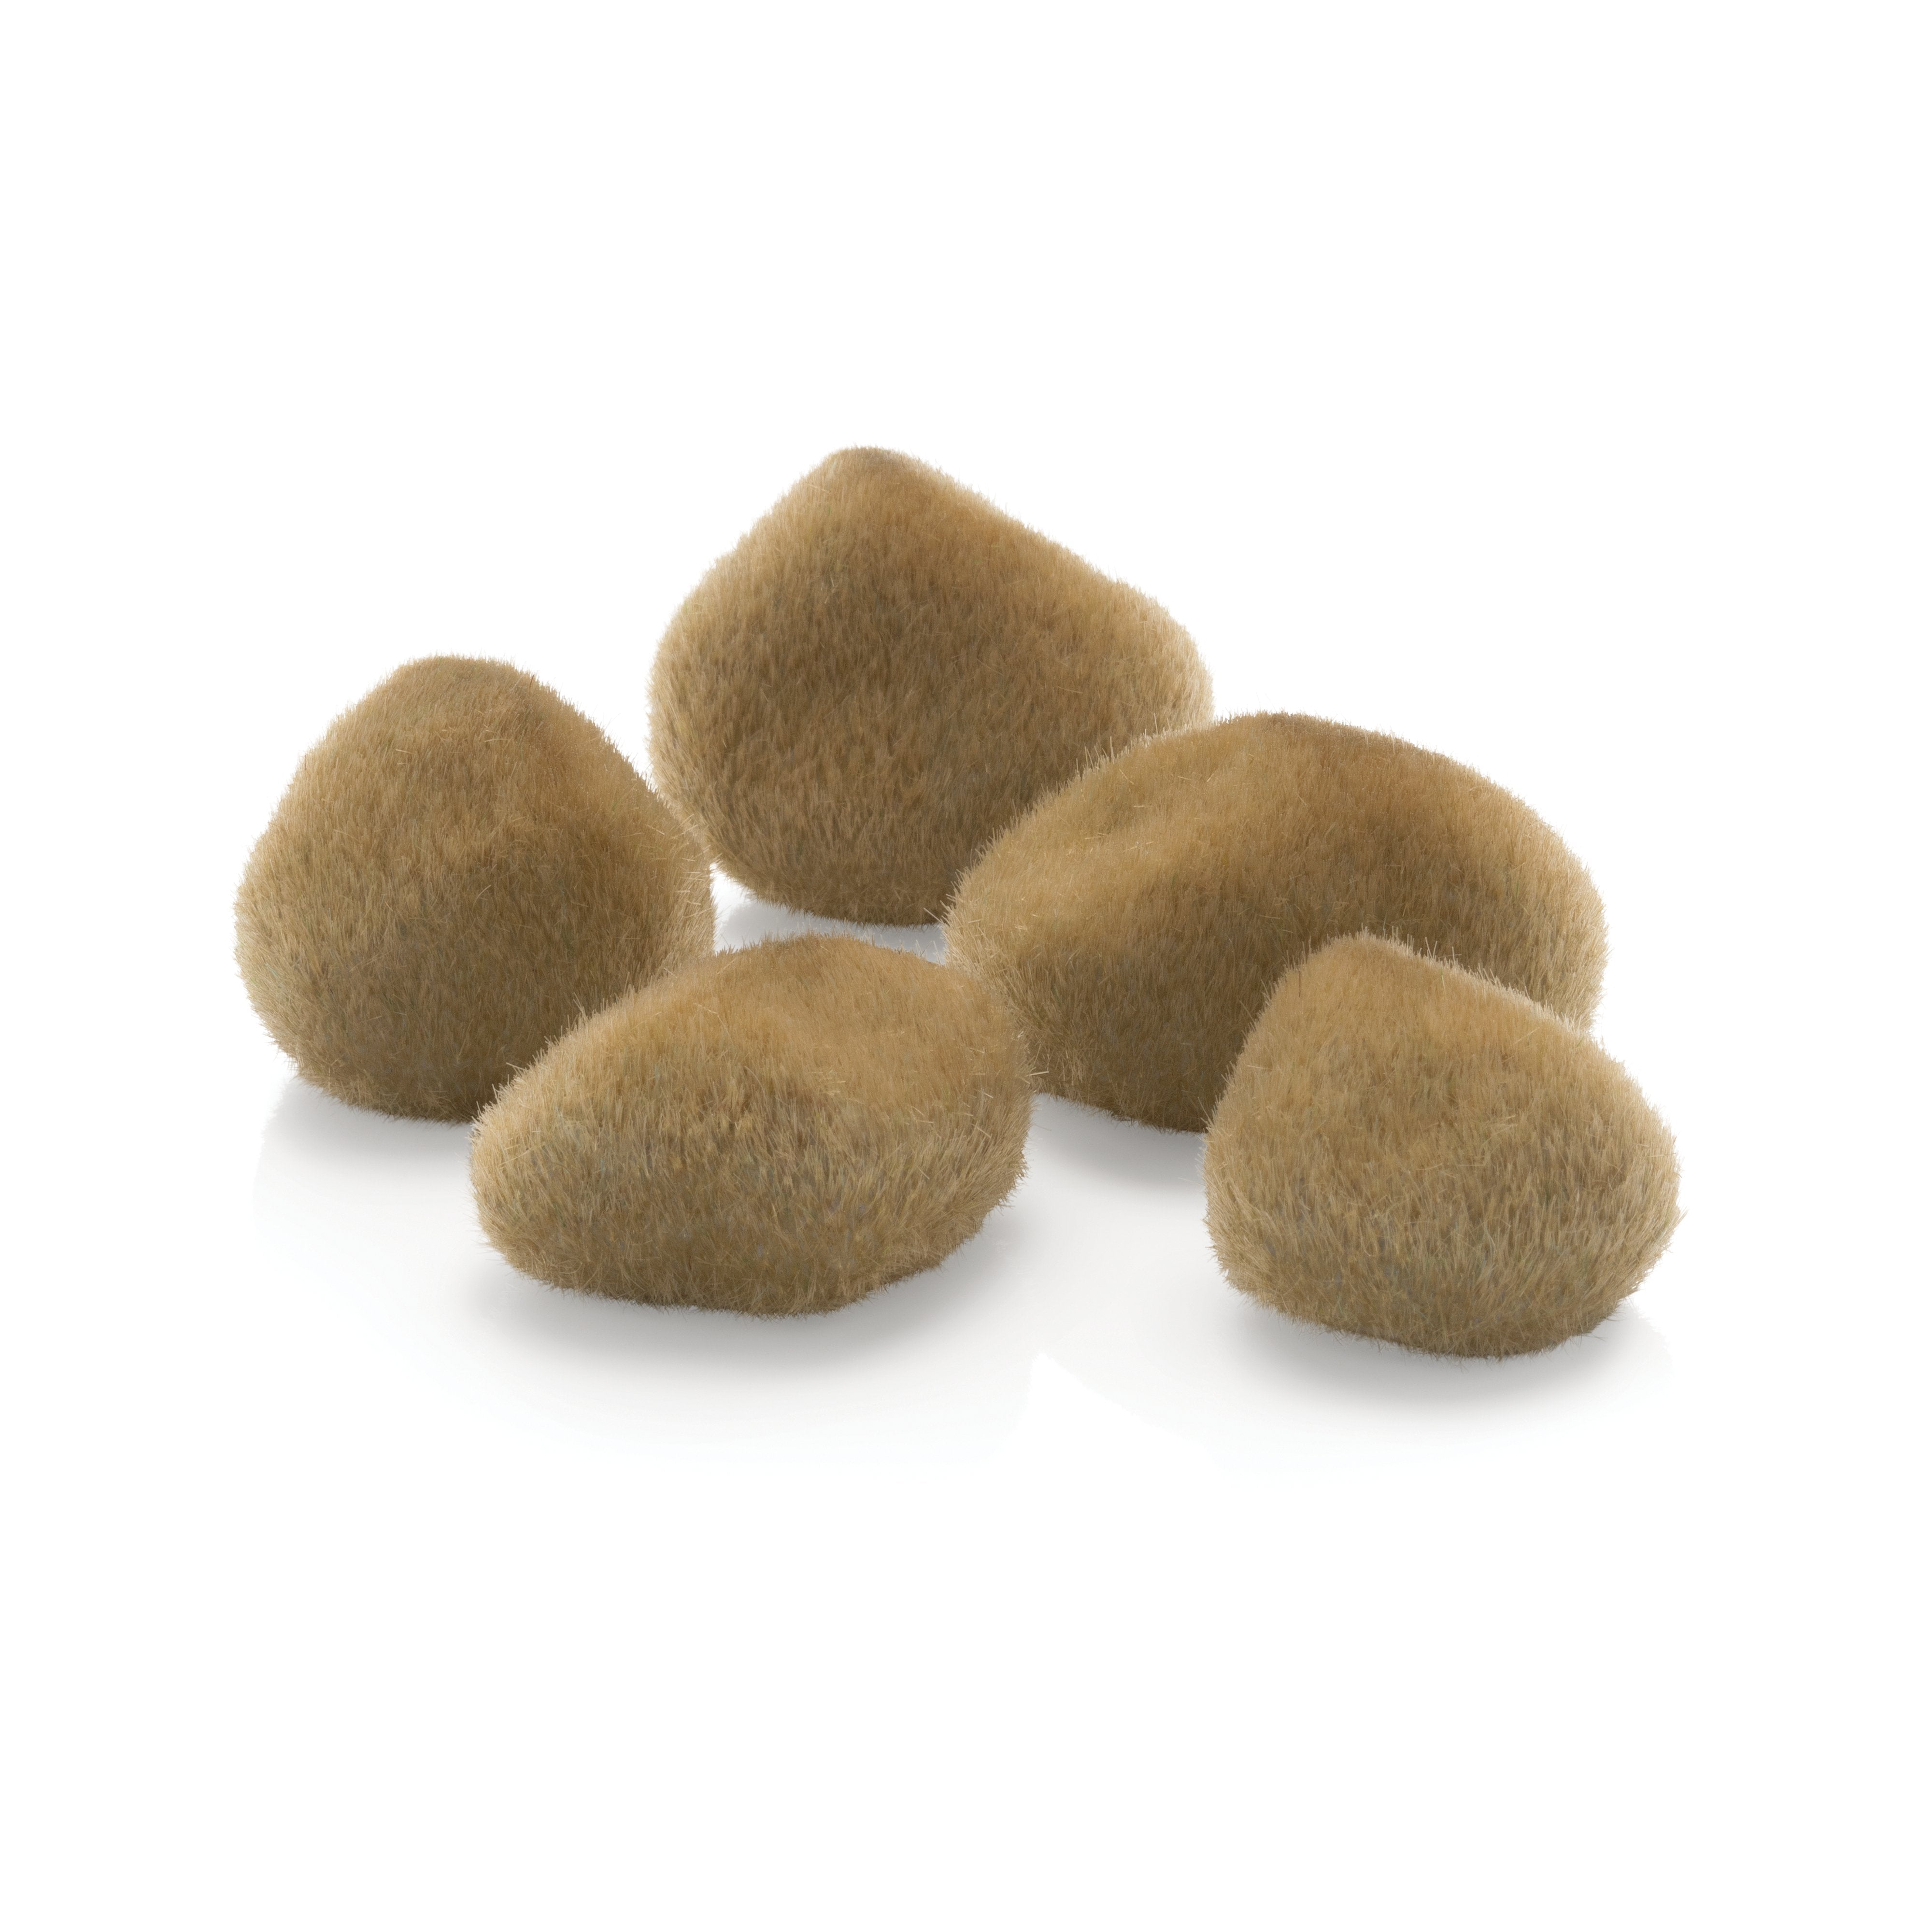 Moss Pebbles Set available in Sand